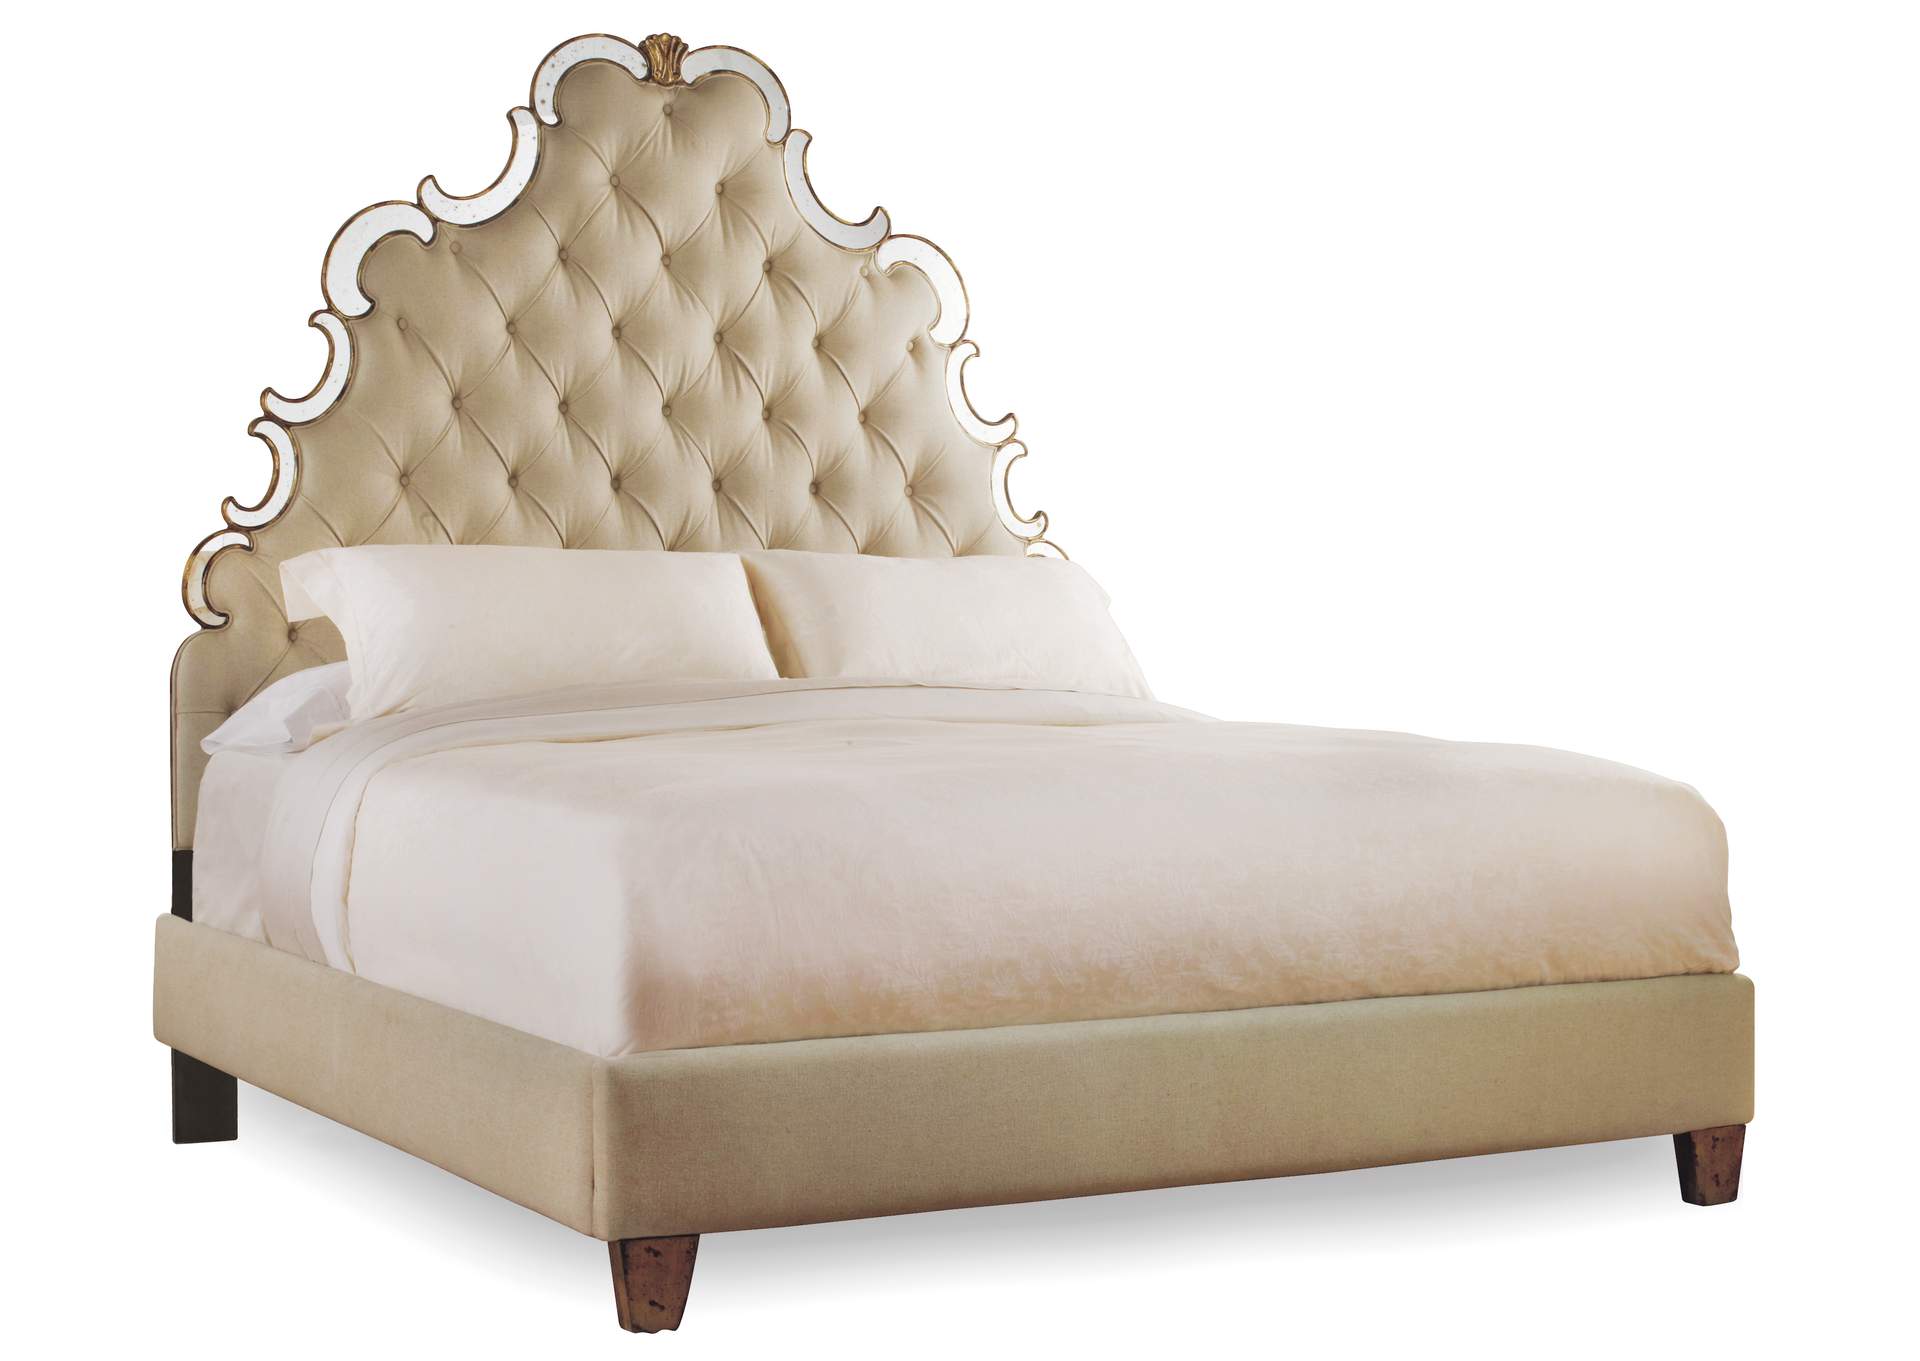 Sanctuary Queen Tufted Bed - Bling,Hooker Furniture